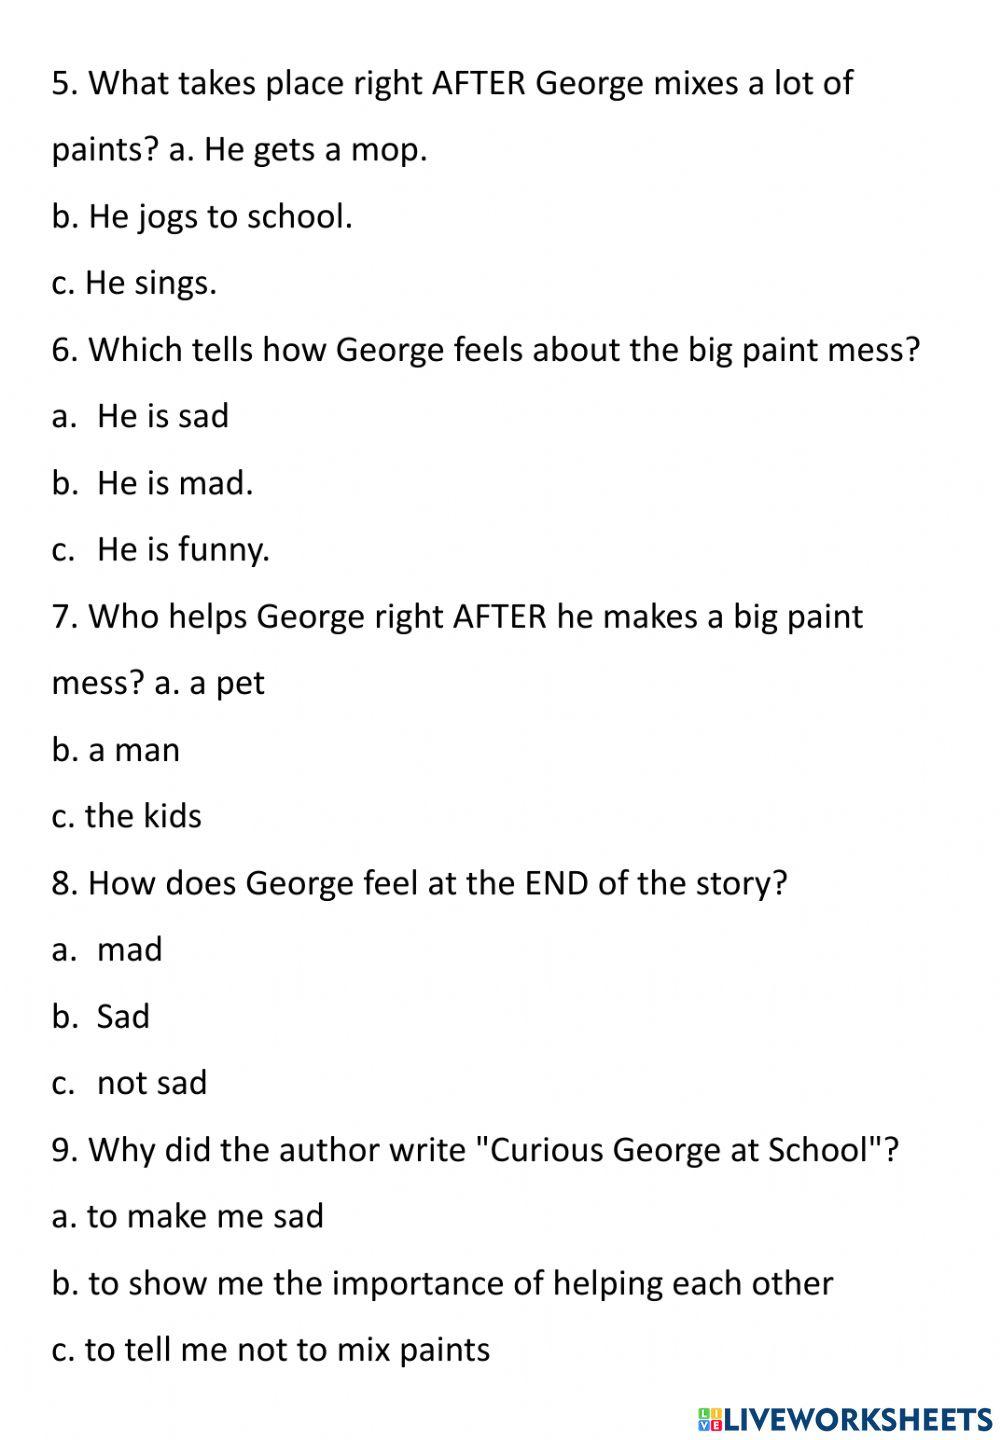 Curious George at School Revision Test